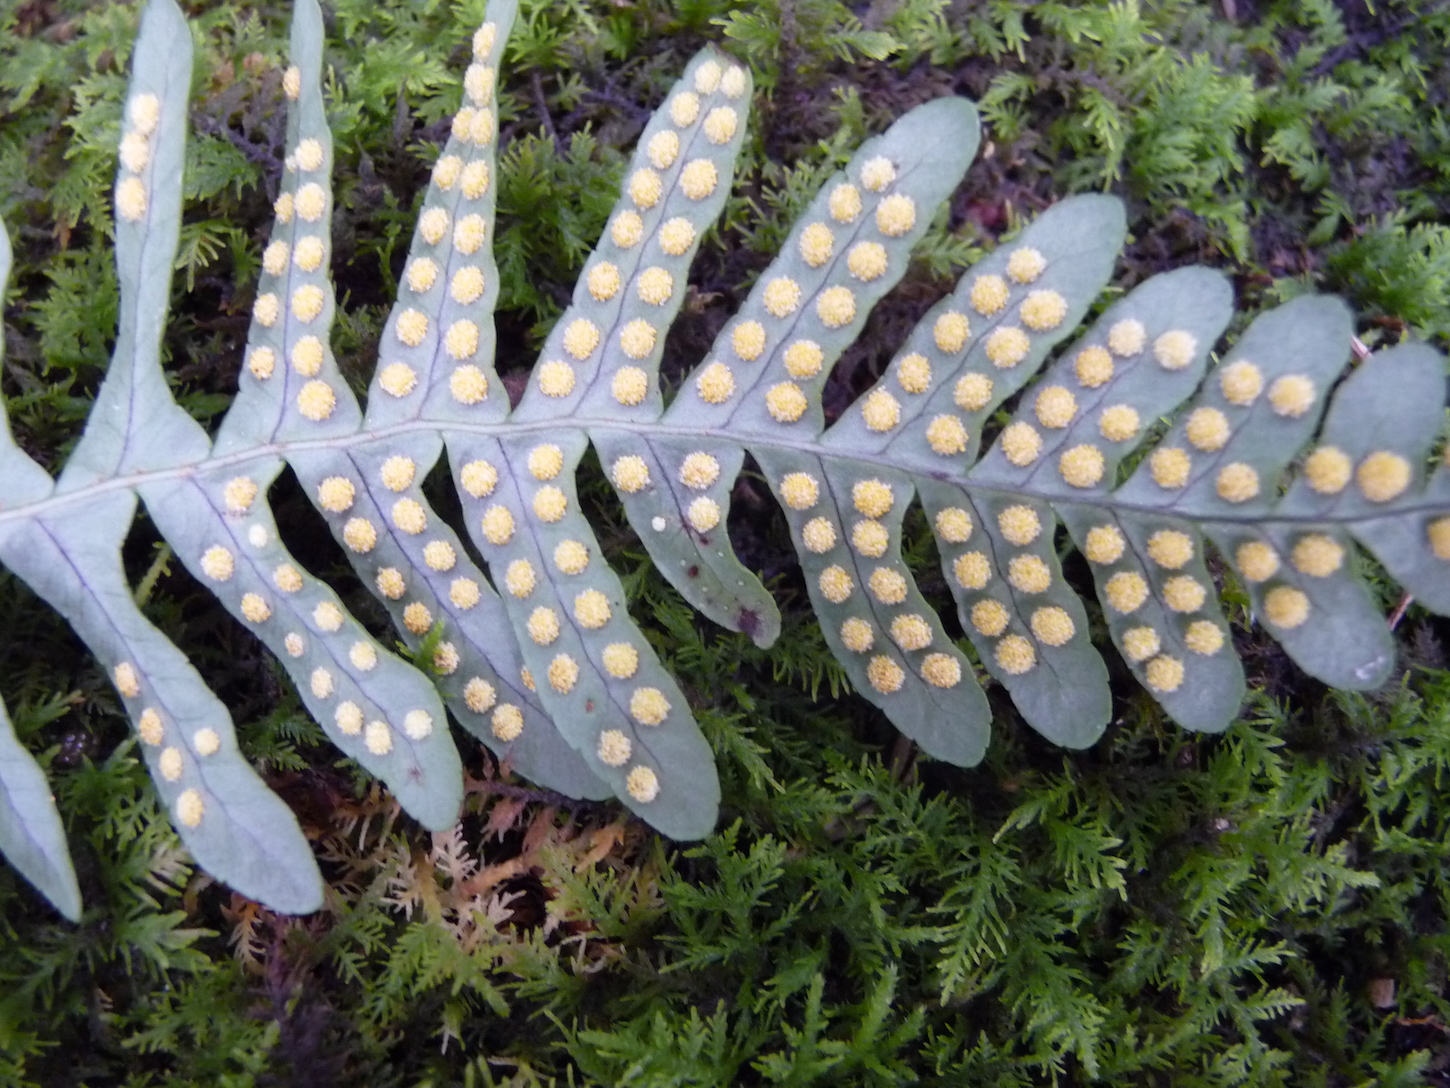 The Scientific Name is Polypodium appalachianum. You will likely hear them called Appalachian polypody. This picture shows the The round sporangia are not covered by an indusium of Polypodium appalachianum